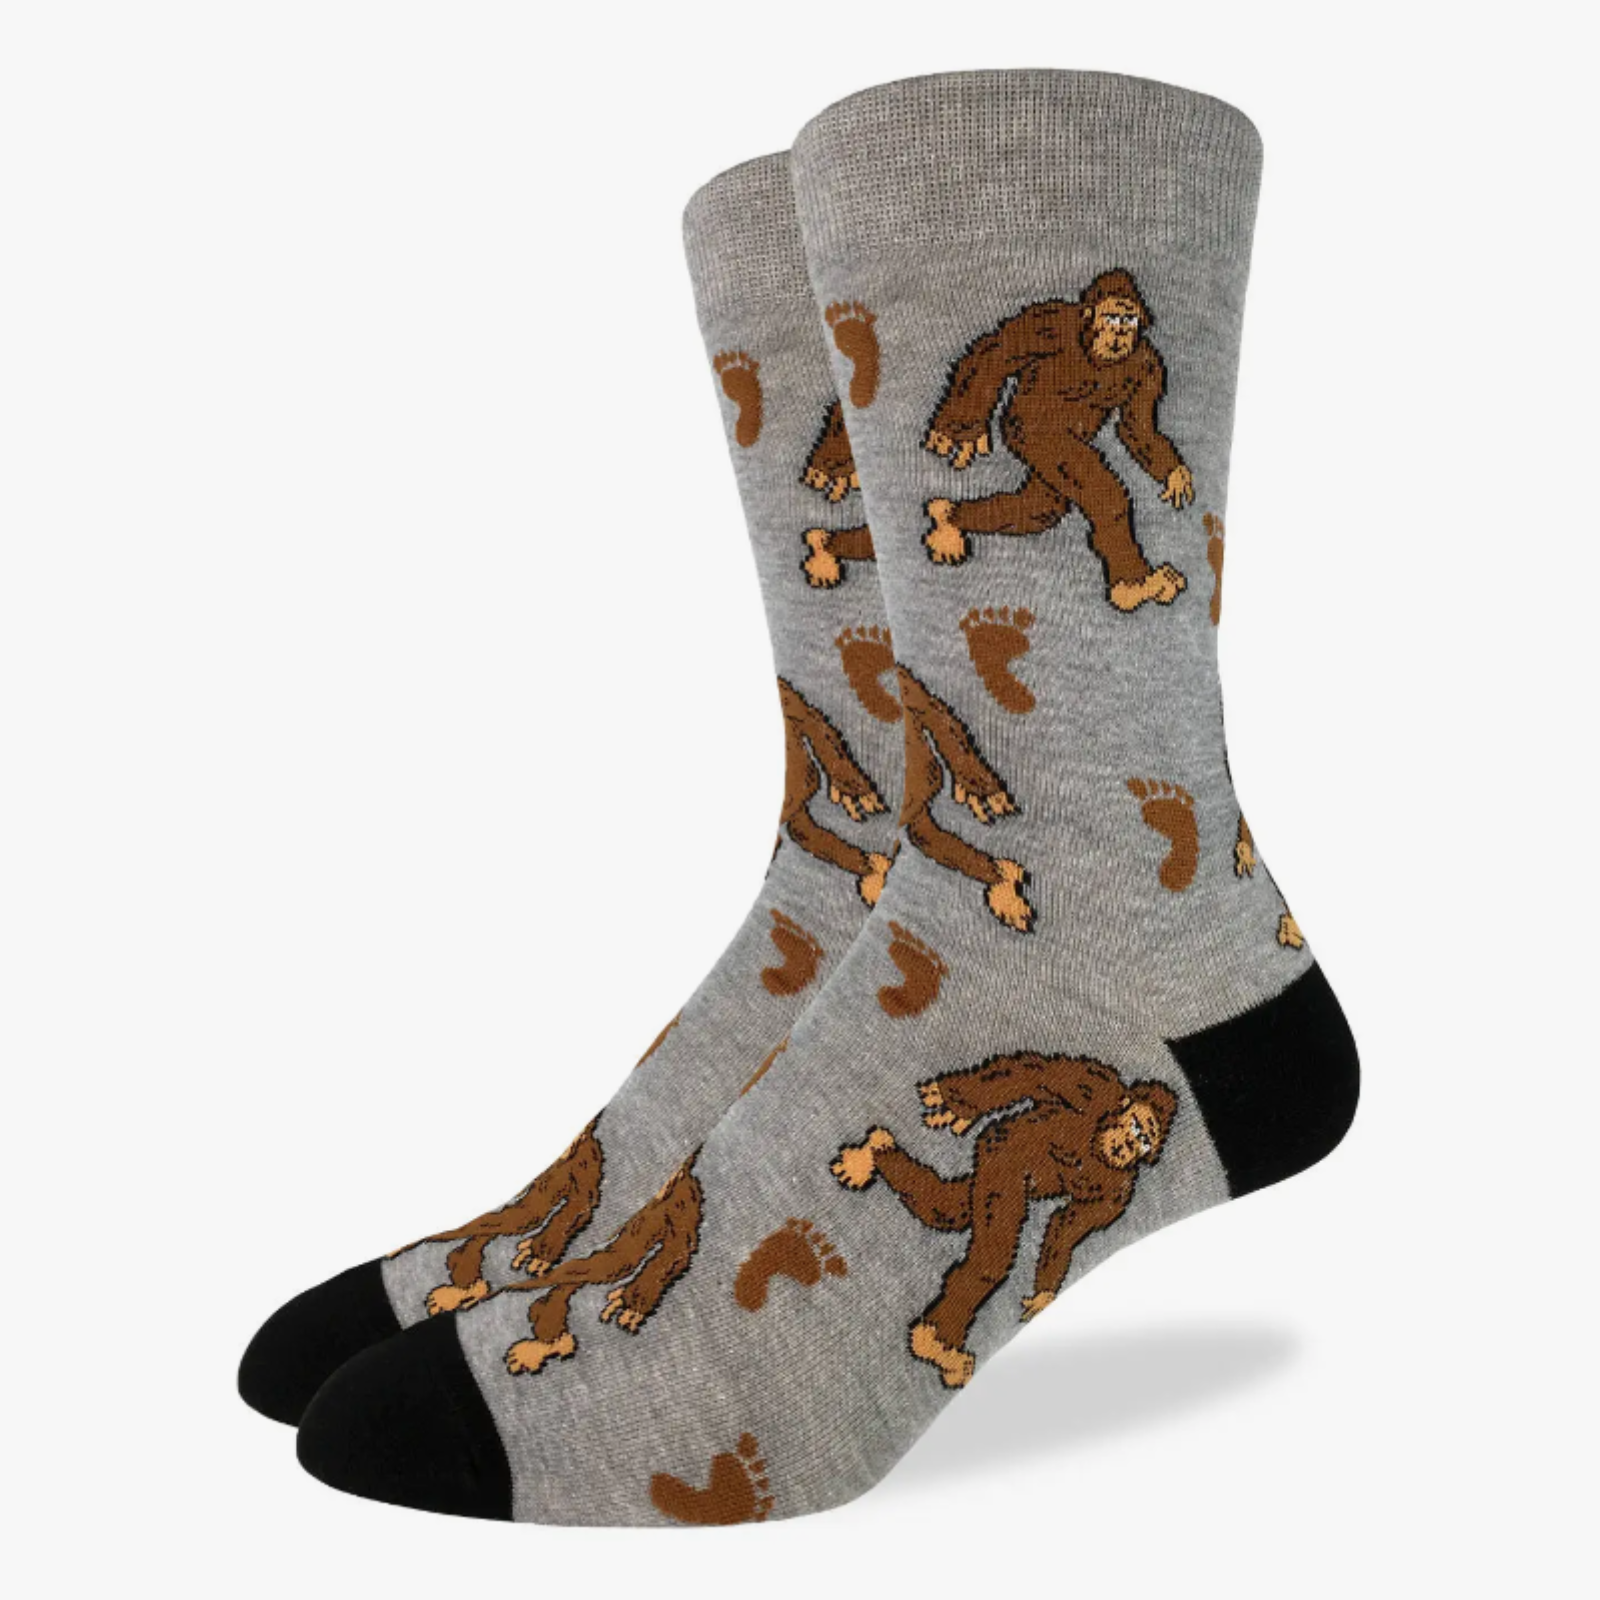 Good Luck Sock Bigfoot women's and men's sock featuring gray sock with brown Bigfoot all over